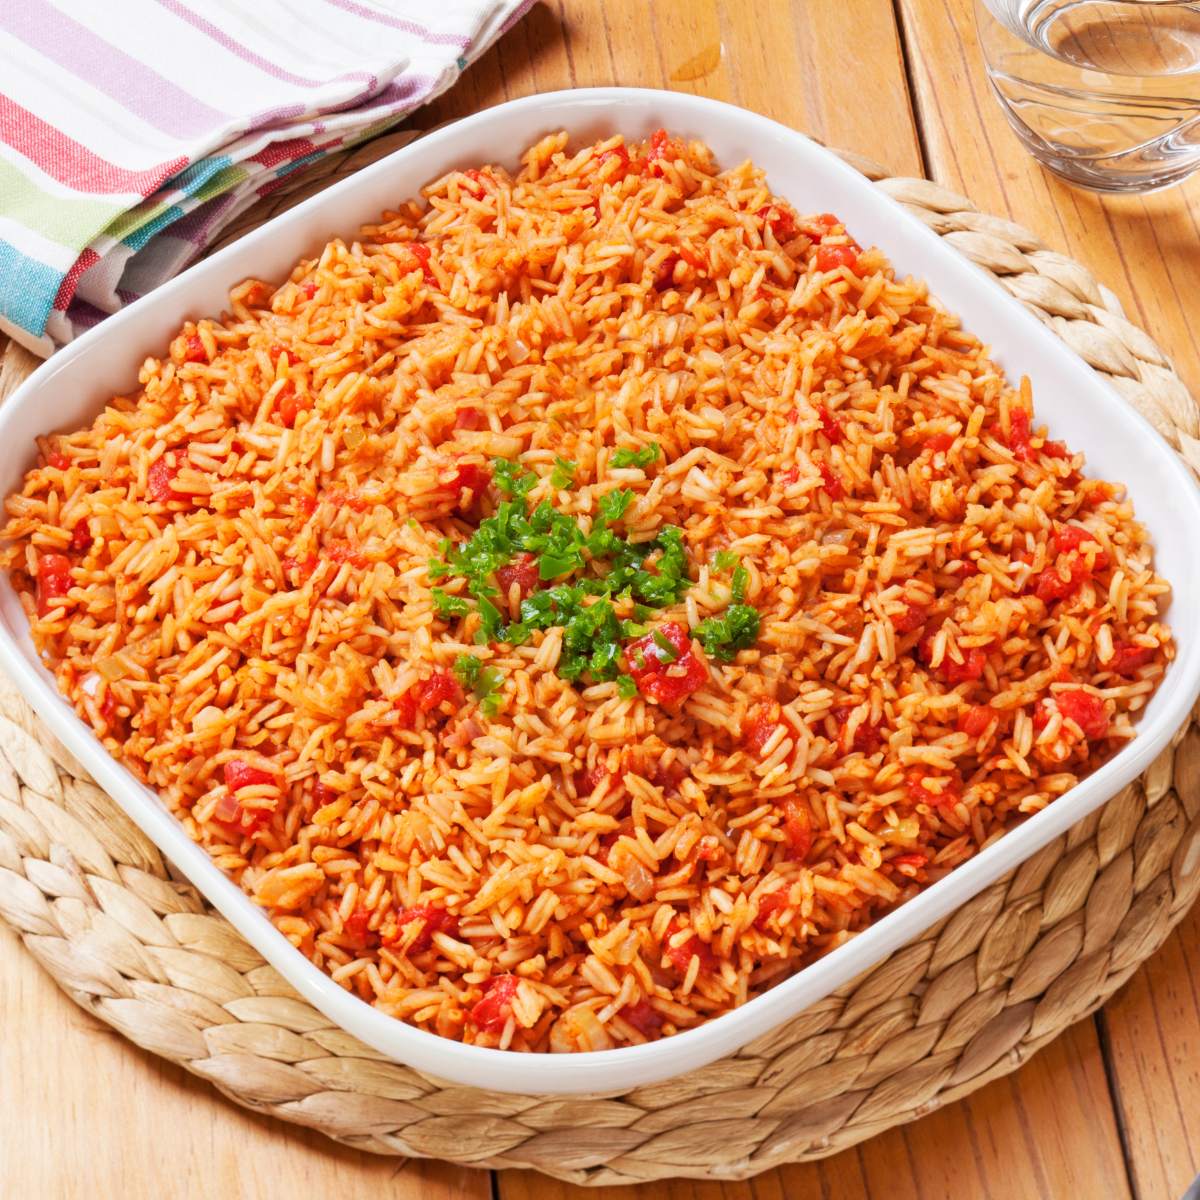 Spanish Rice Dish on the table